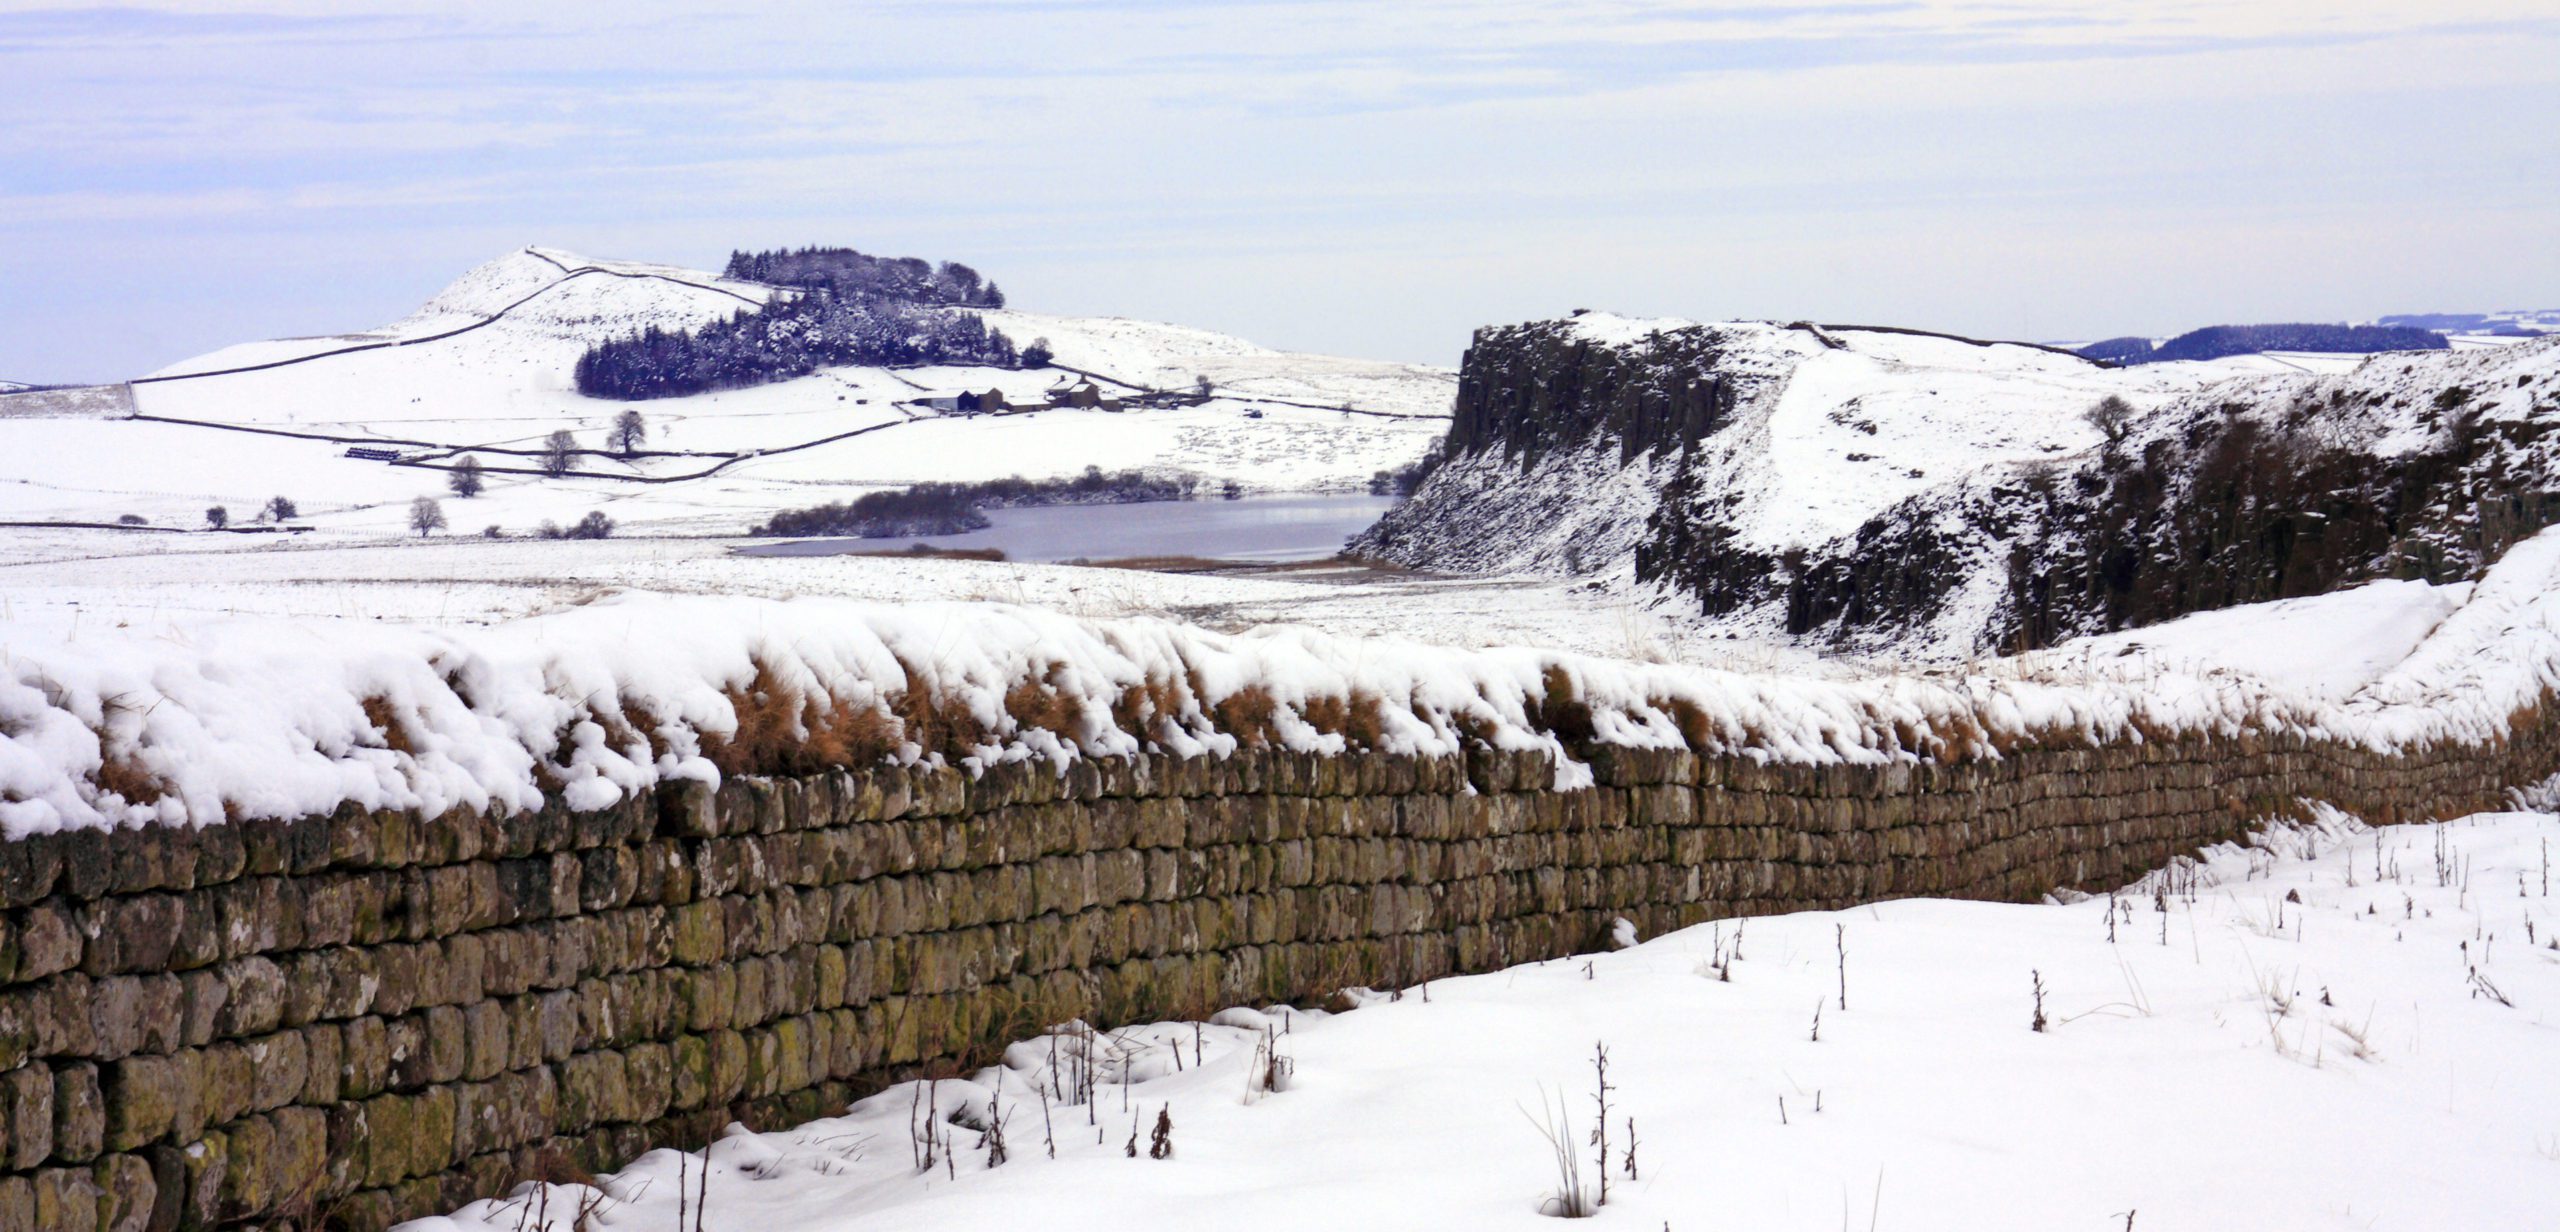 Hadrians Wall in the snow